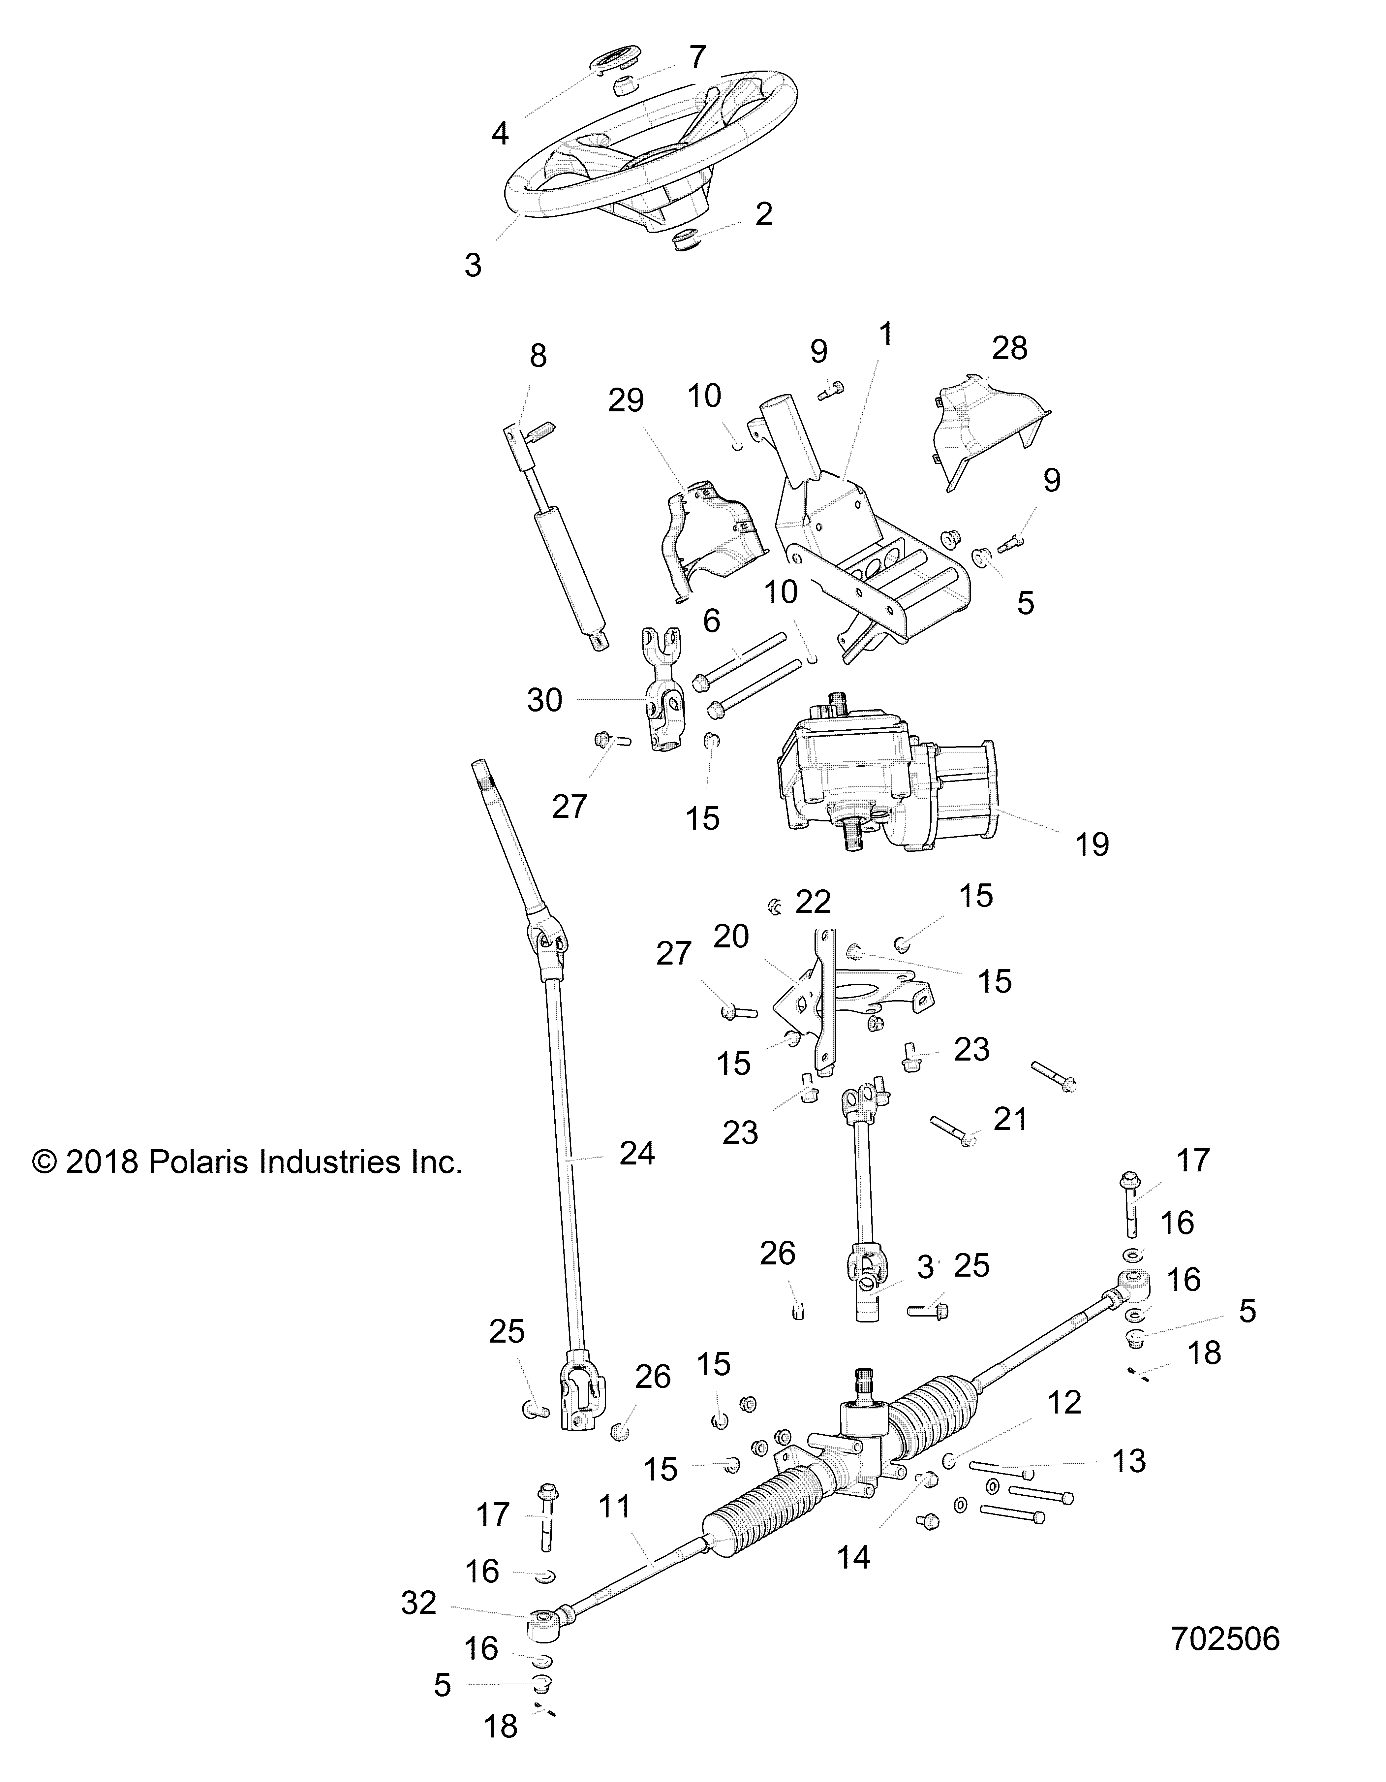 Part Number : 1824165 STEERING GEAR BOX ASSEMBLY